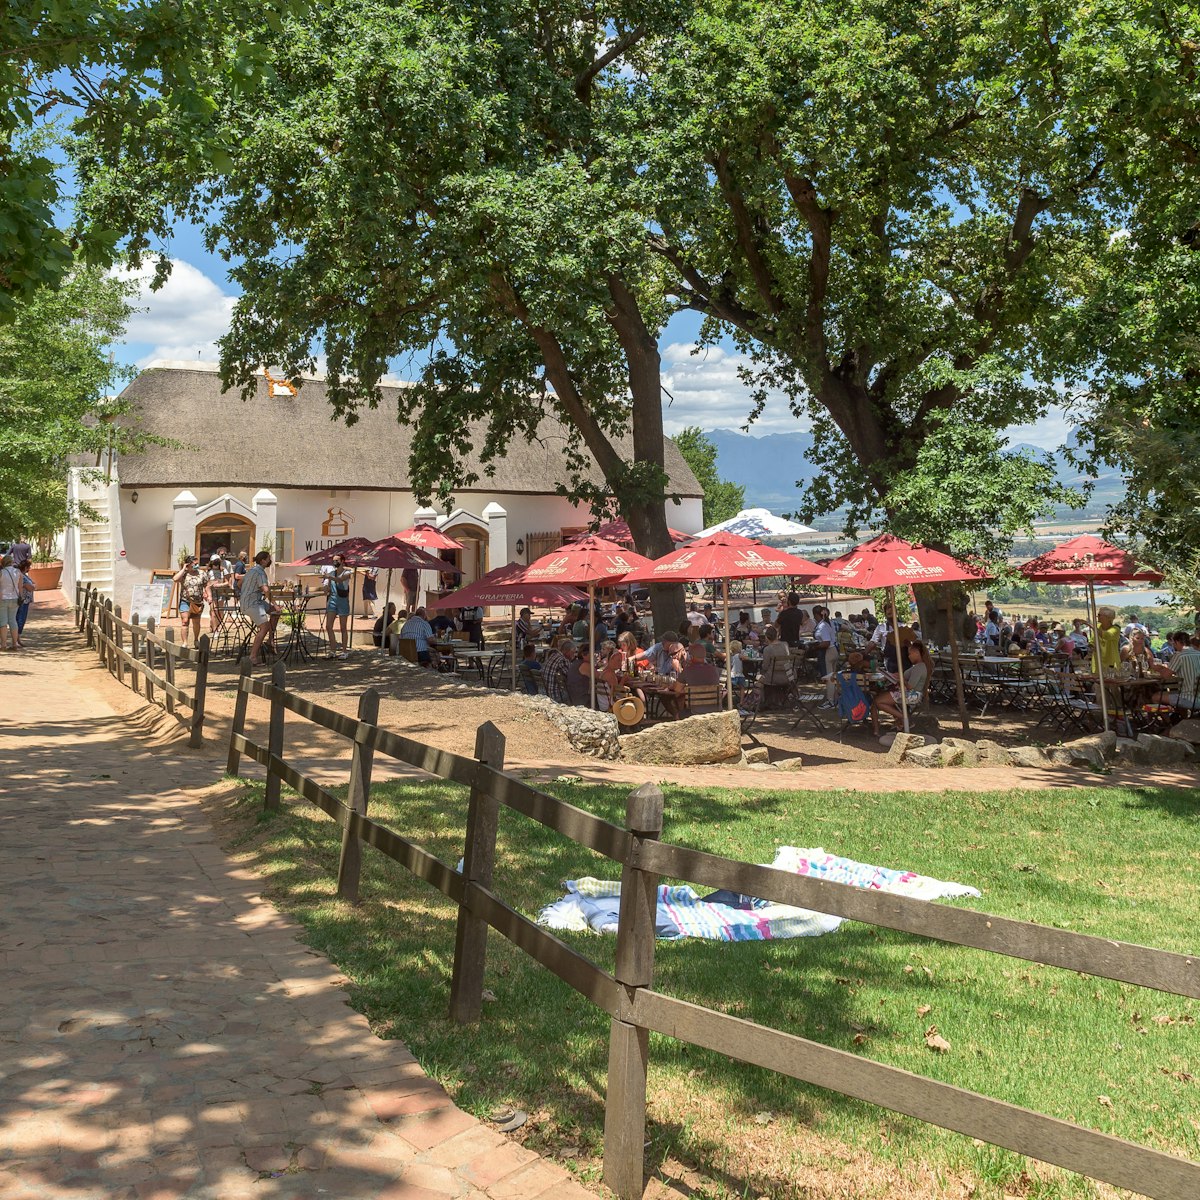 Restaurant and picnic area at Spice Route.